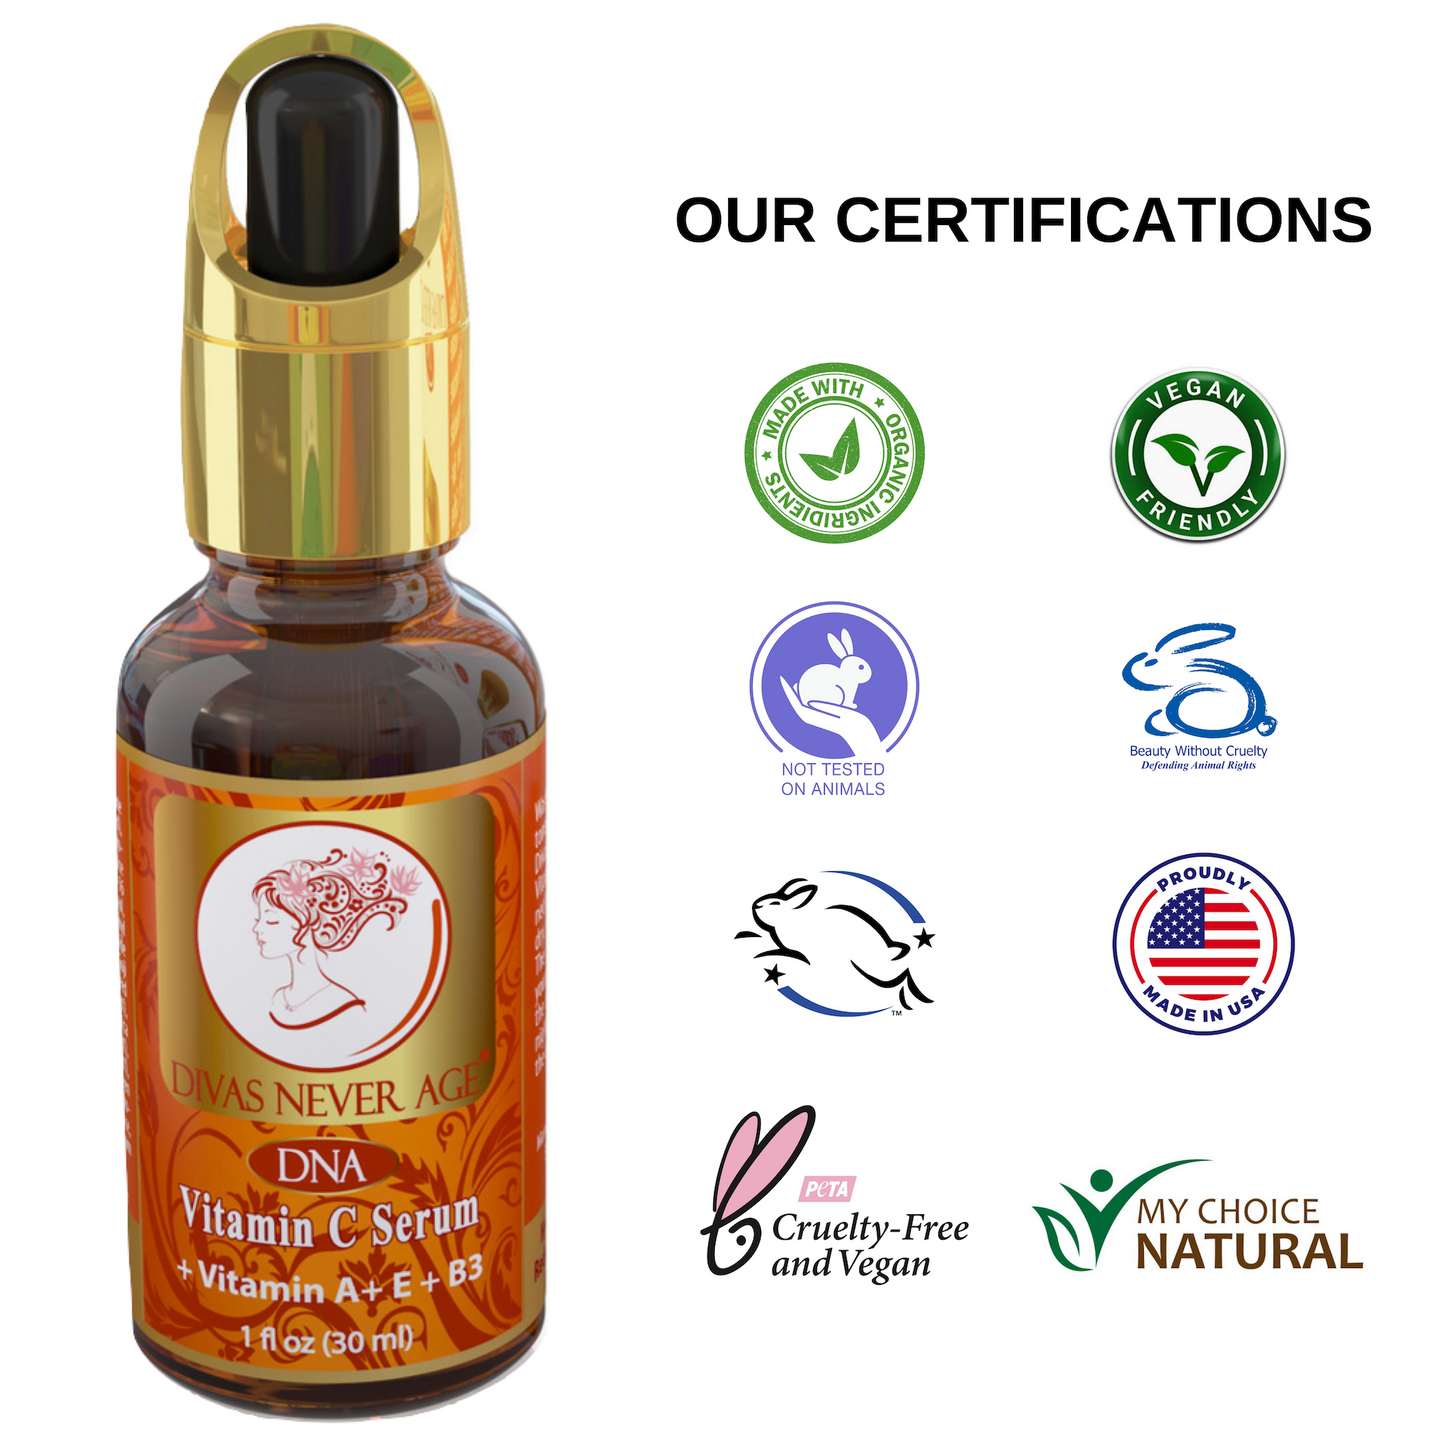 Divas Never Age vitamin c serum is certified by PETA and it is organic, never tested on animals, made in the USA, natural and vegan, cruelty-free certifications 